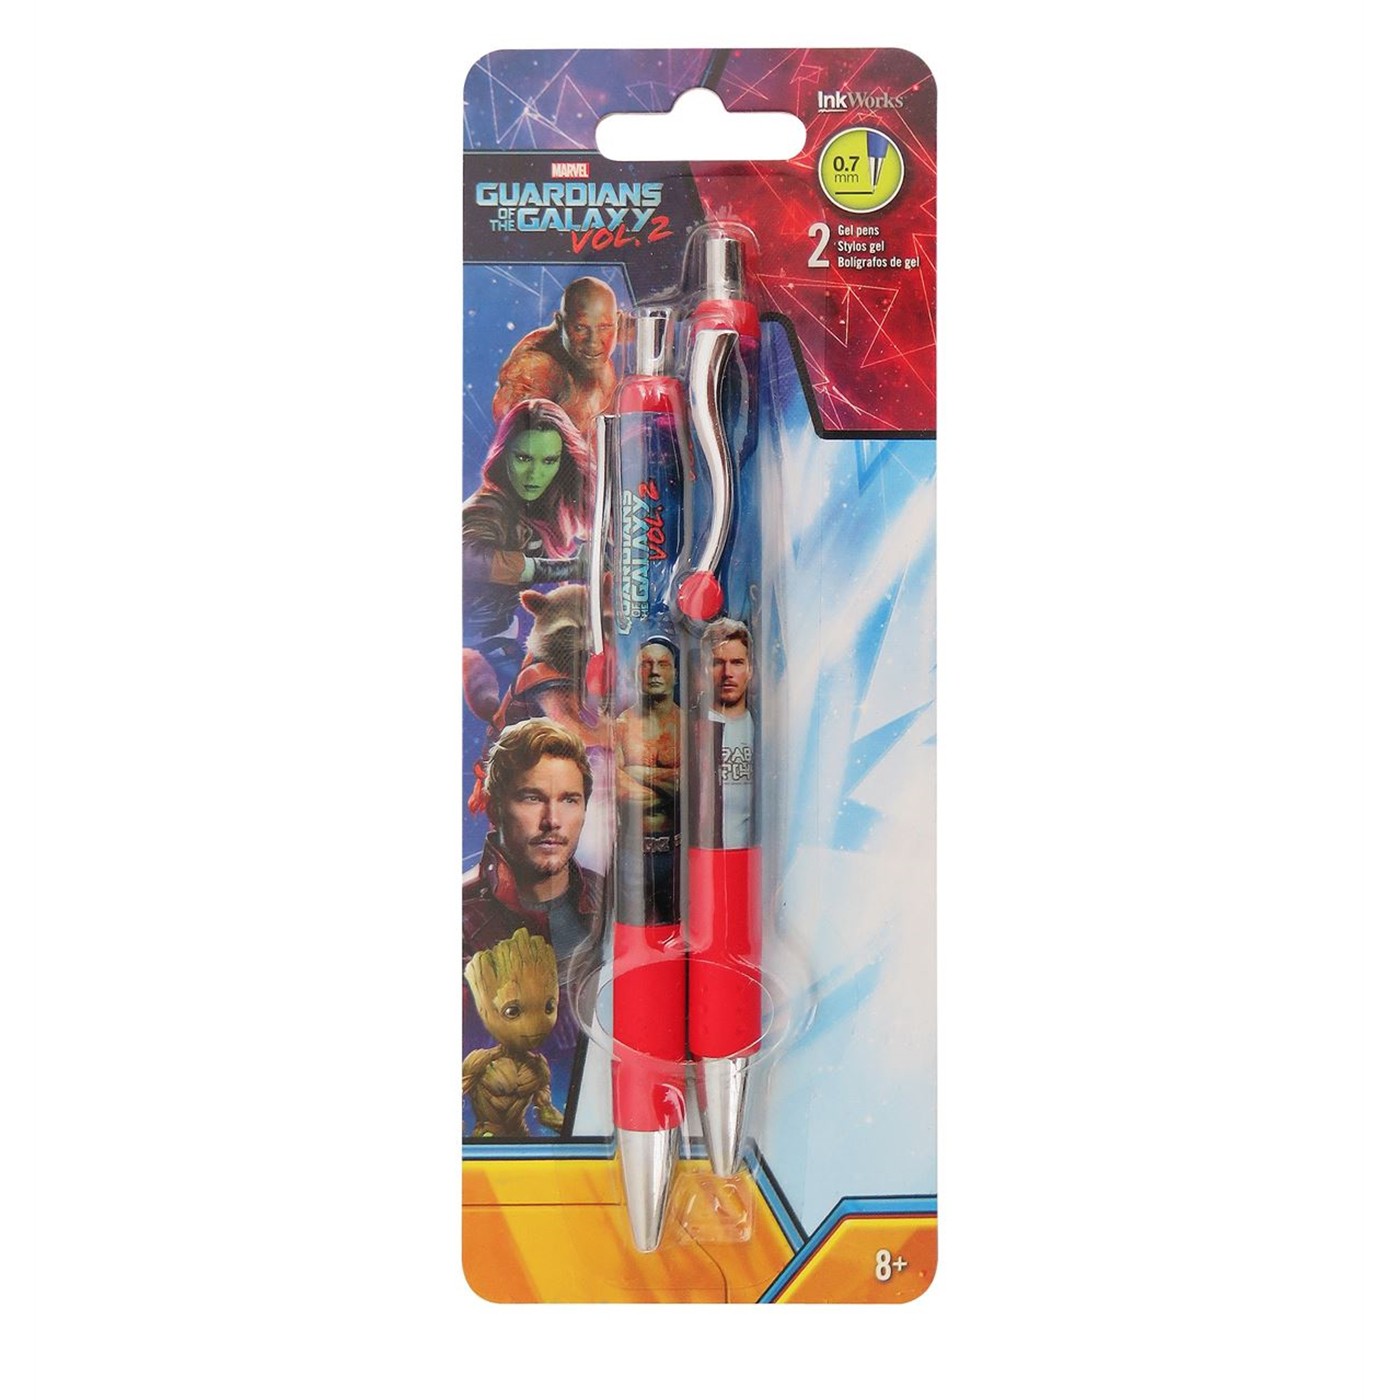 Guardians of the Galaxy Vol. 2 Pen 2-Pack